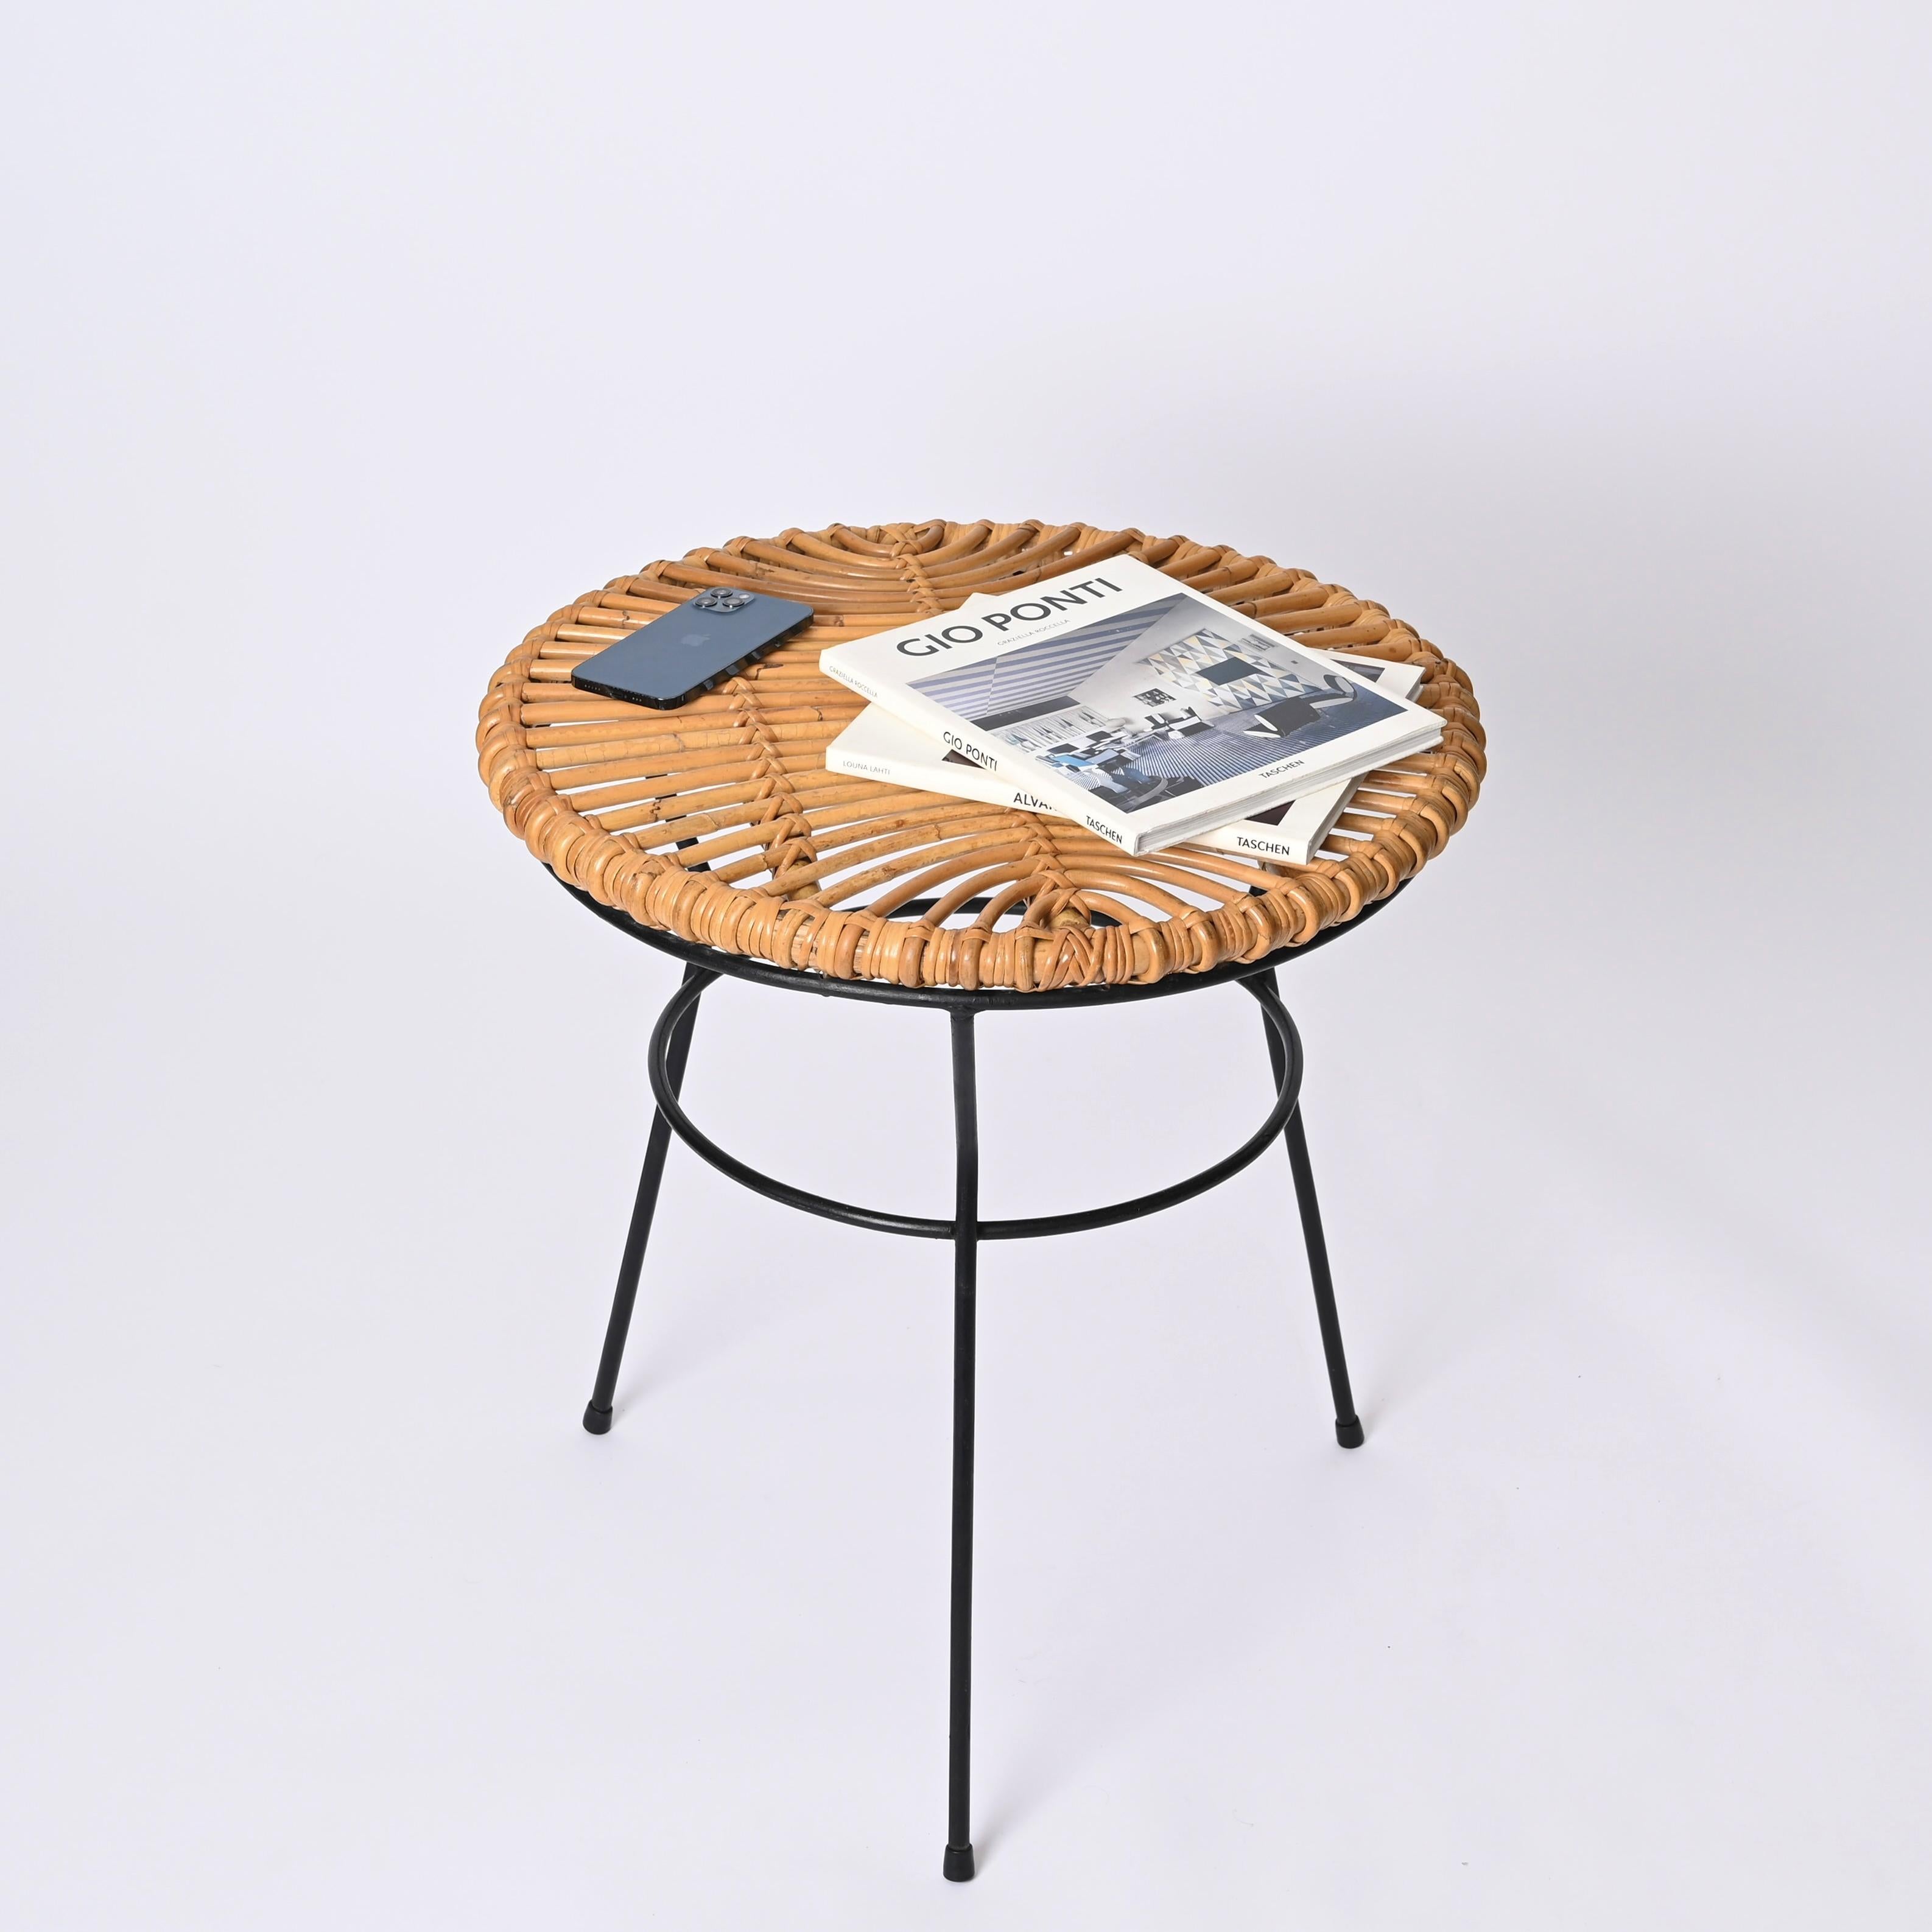 Fantastic round tripod coffee table in curved bamboo, rattan and woven wicker with black iron base. This lovely French Riviera style table was designed by Roberto Mango and produced in Italy during the 1960s.

This coffee table has a fantastic round